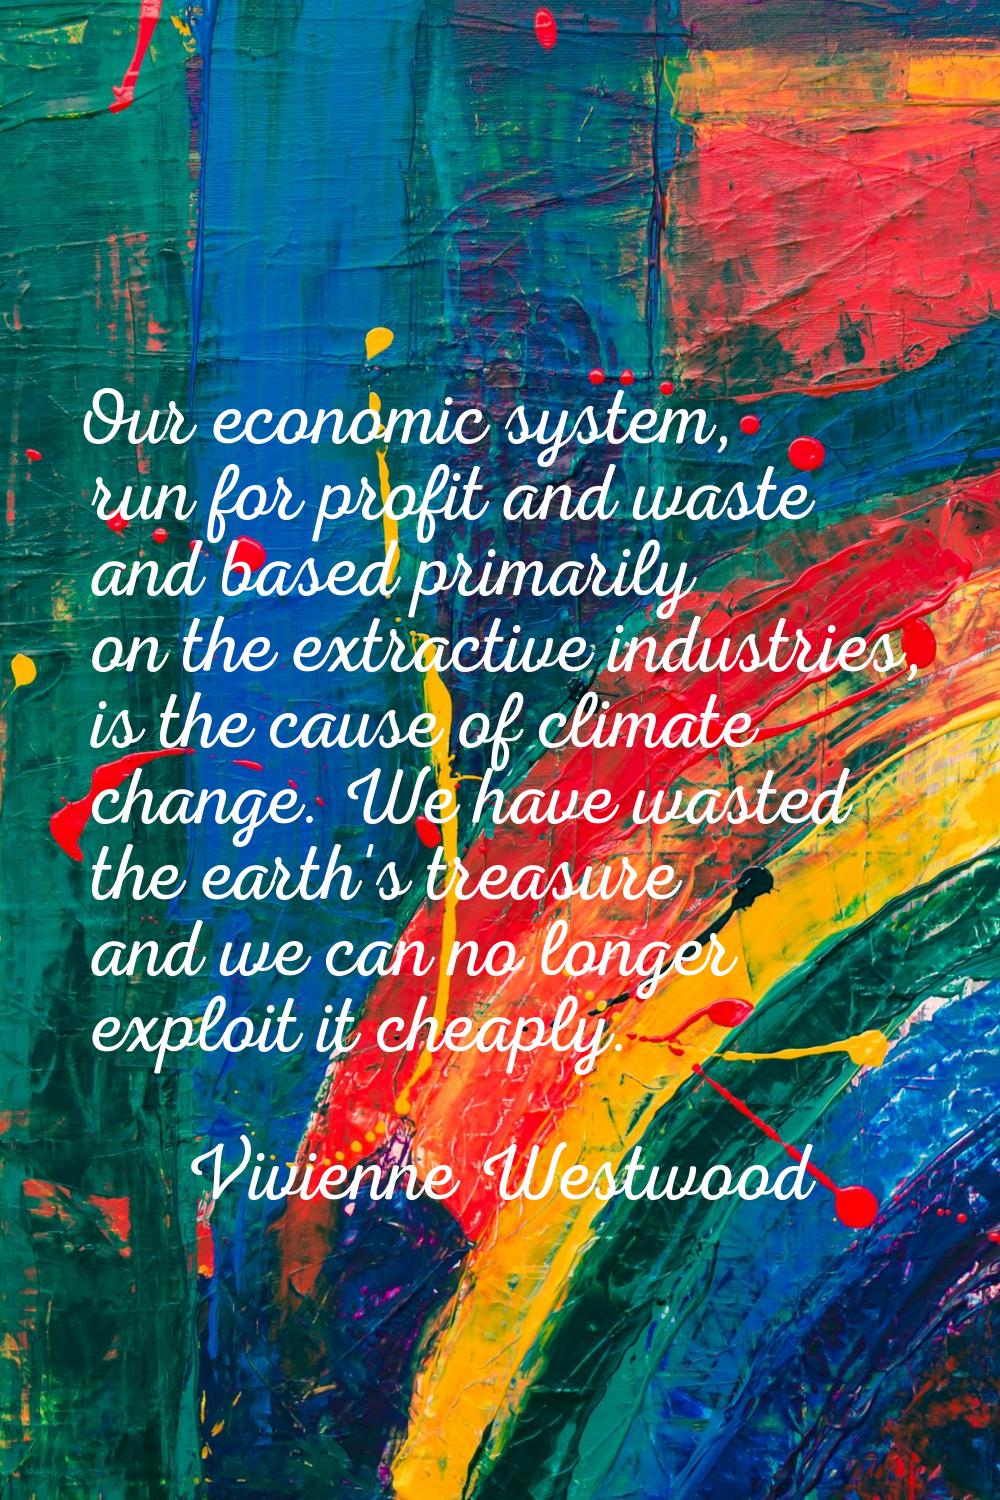 Our economic system, run for profit and waste and based primarily on the extractive industries, is 